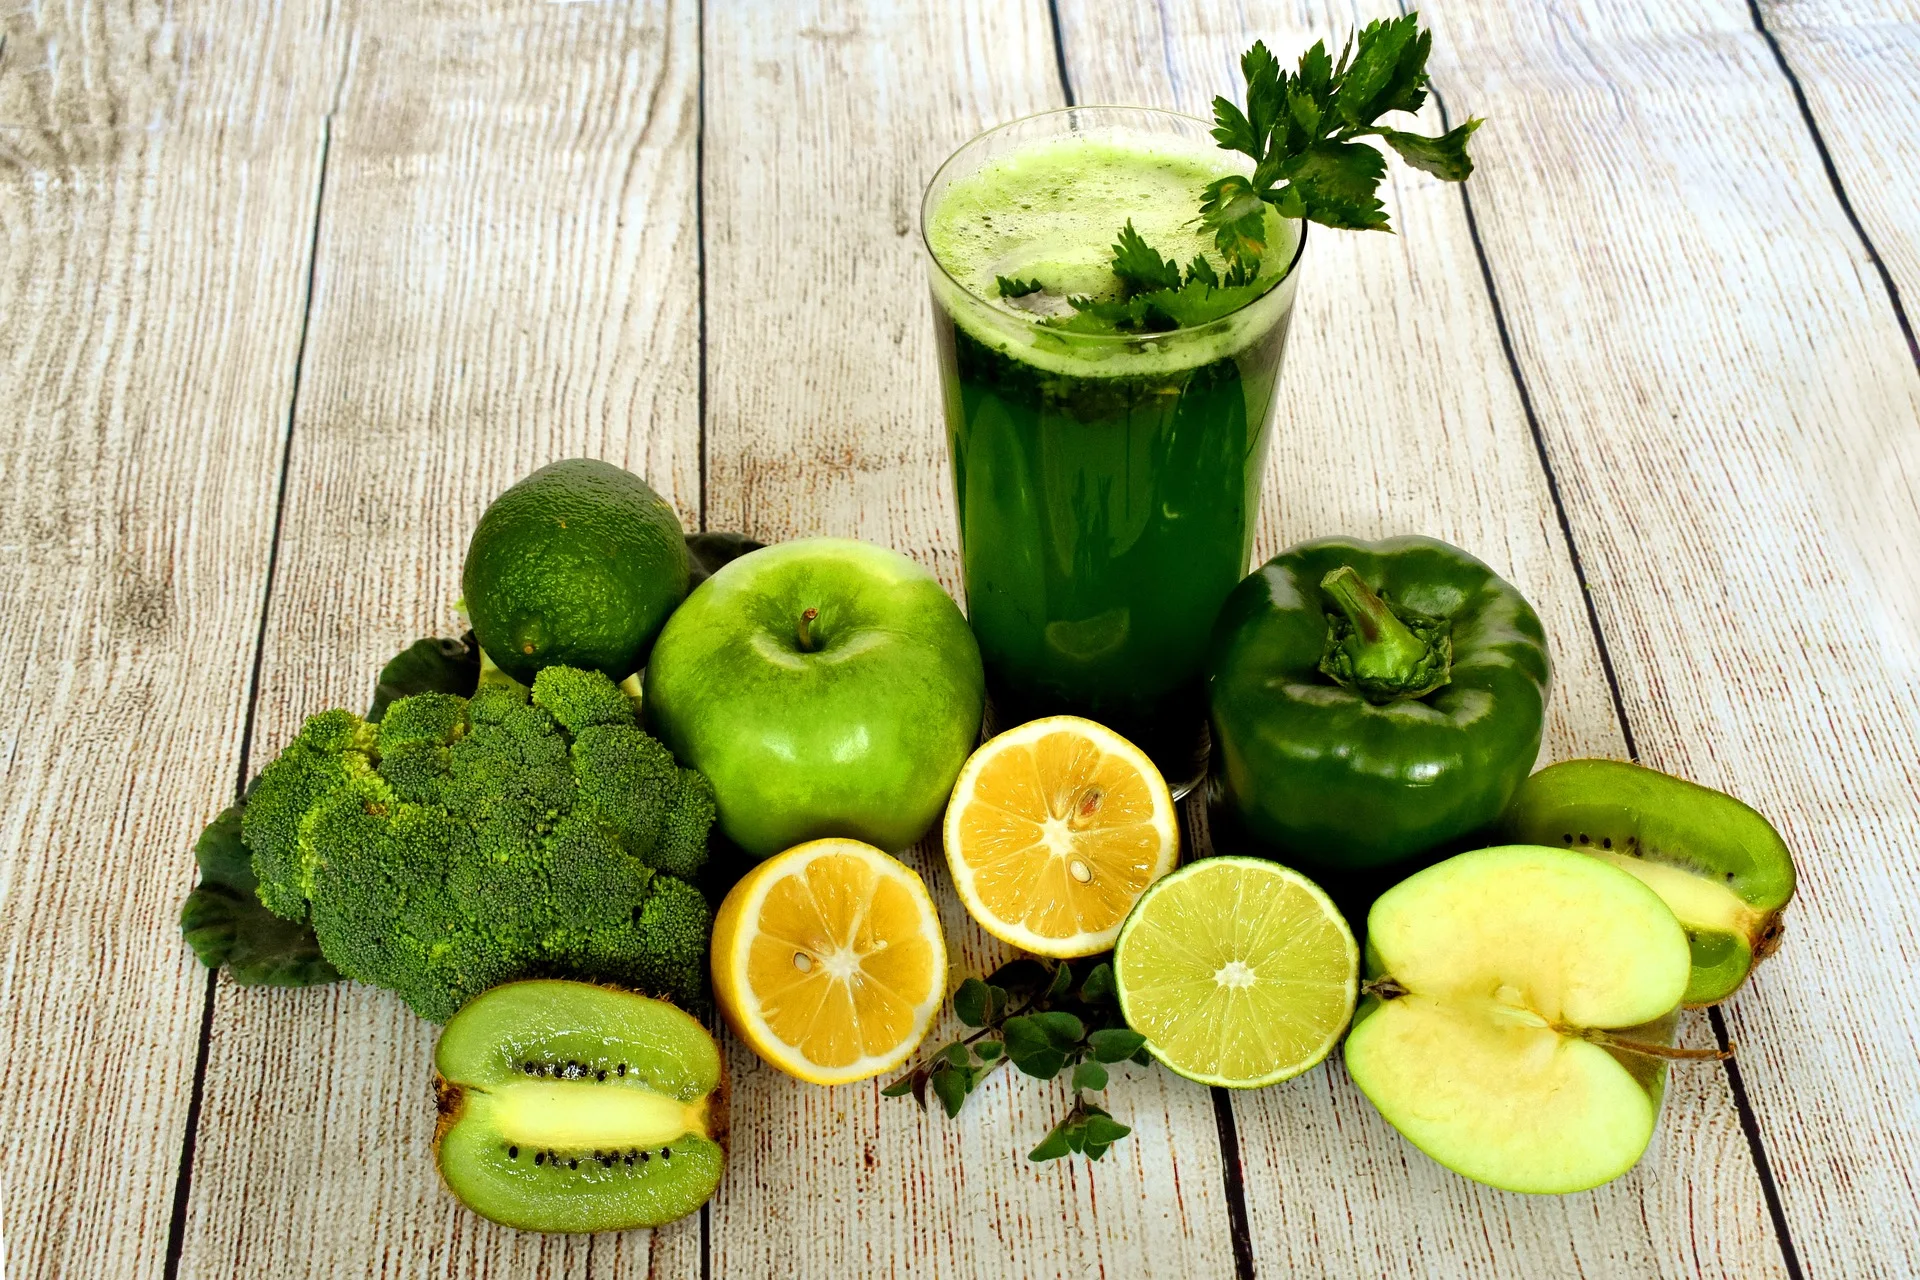 A selection of fresh green fruits and vegetables arranged alongside a glass filled with a nutritious green smoothie, highlighting the importance of a balanced diet for physical health.